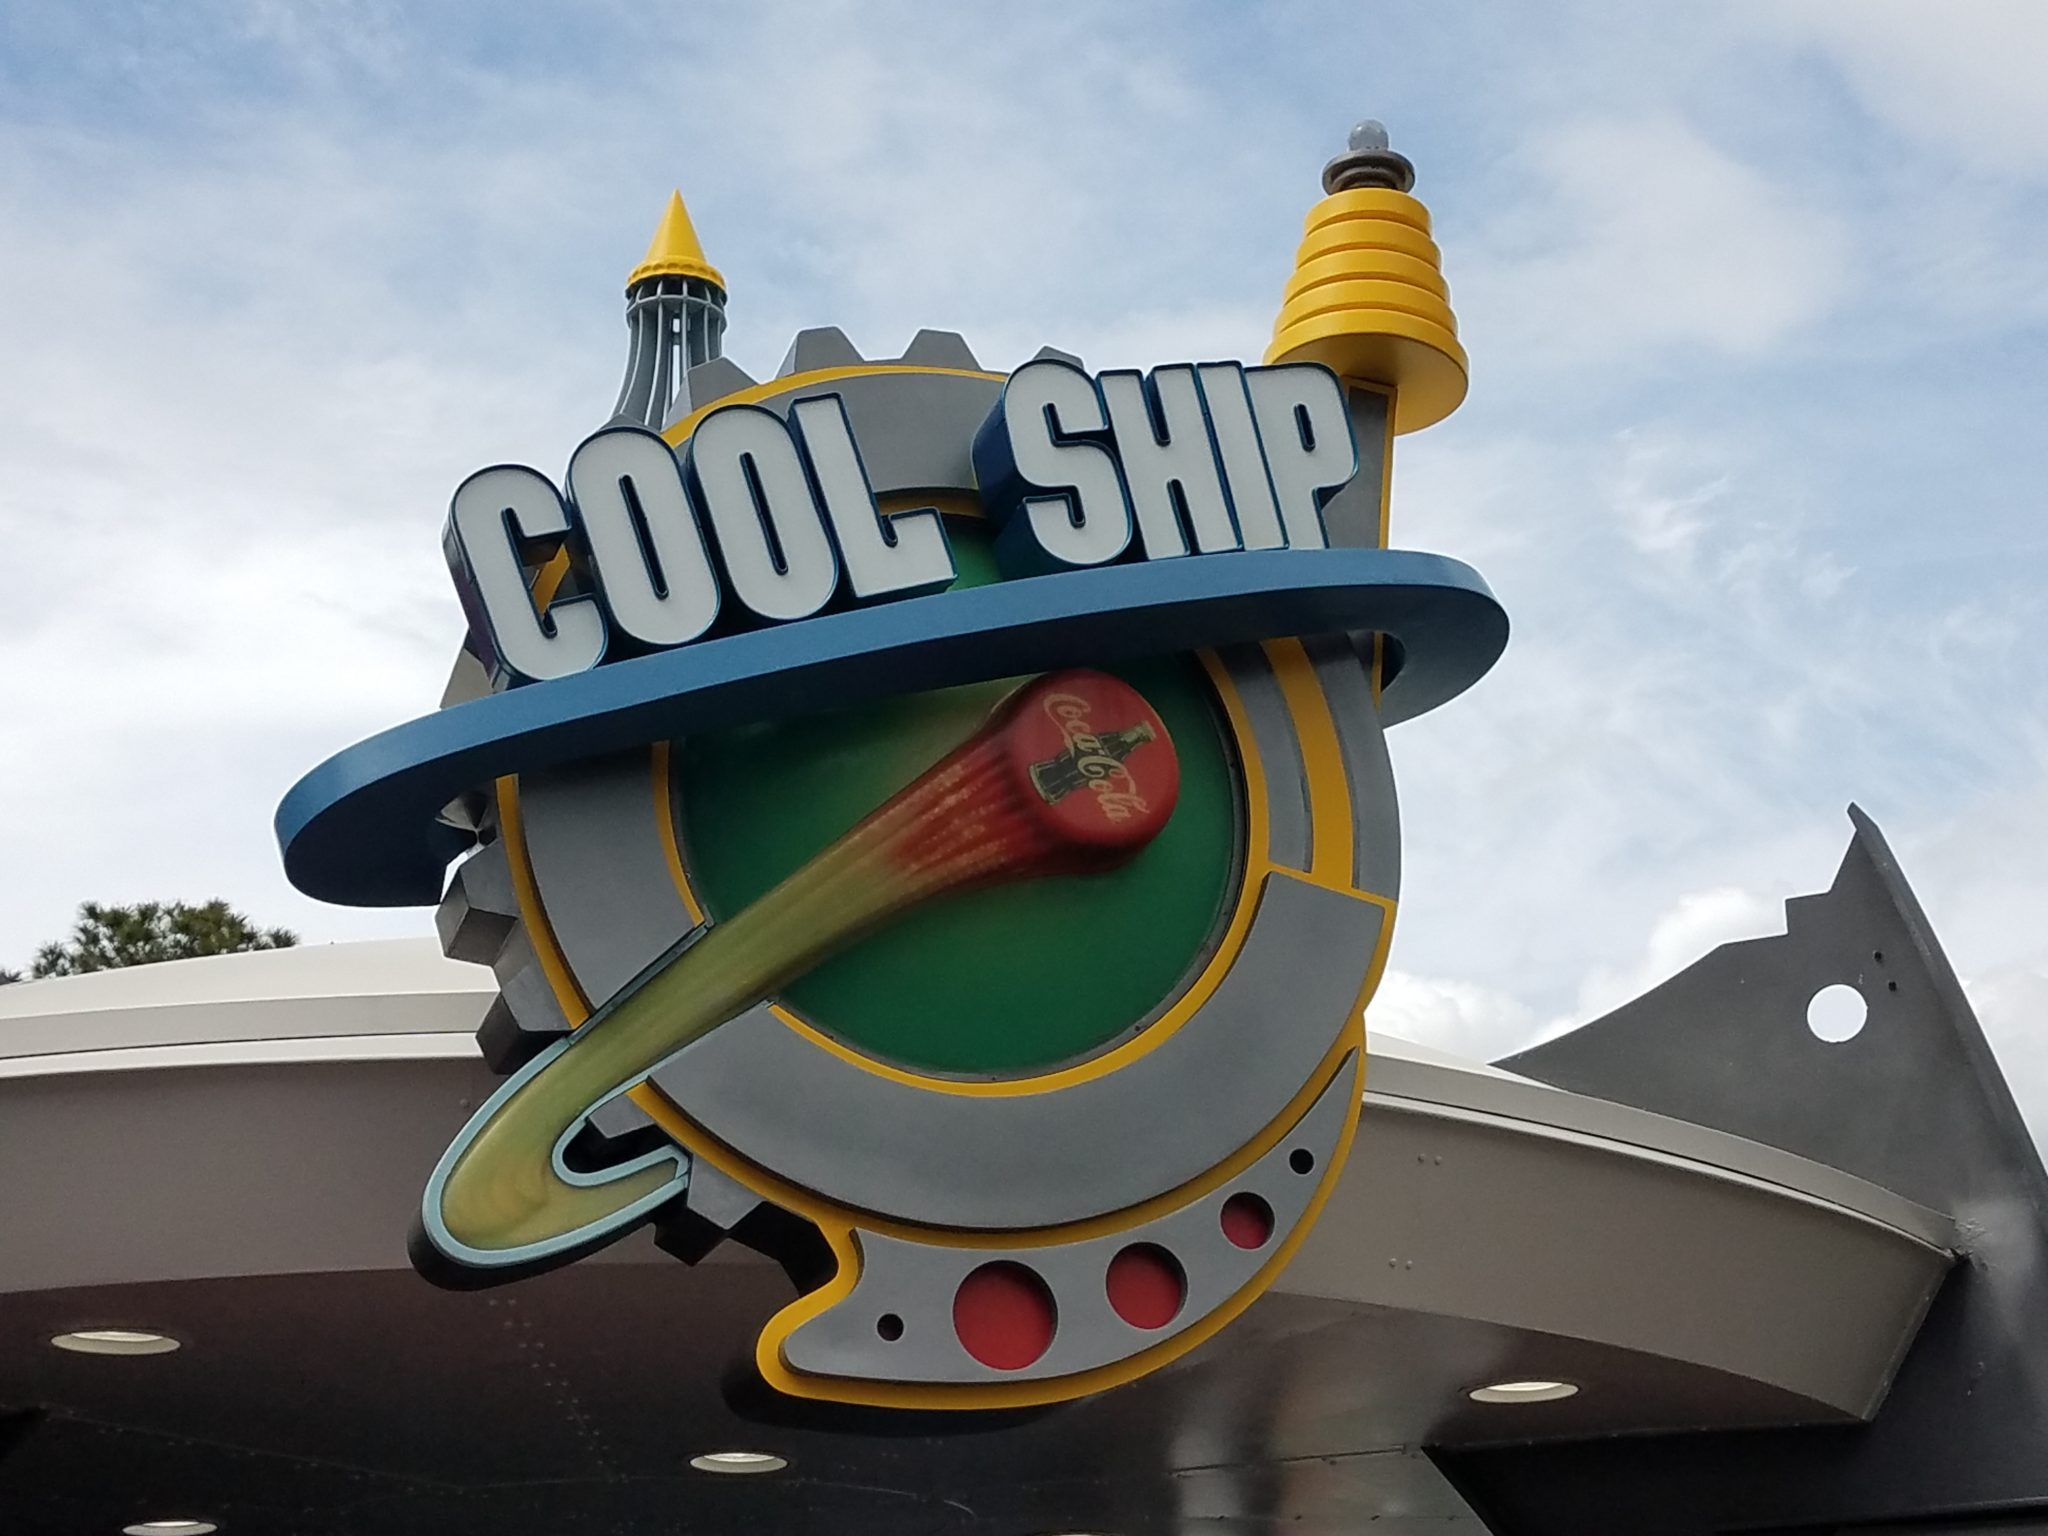 Magic Kingdom’s Cool Ship Now Featuring Pizza Frusta